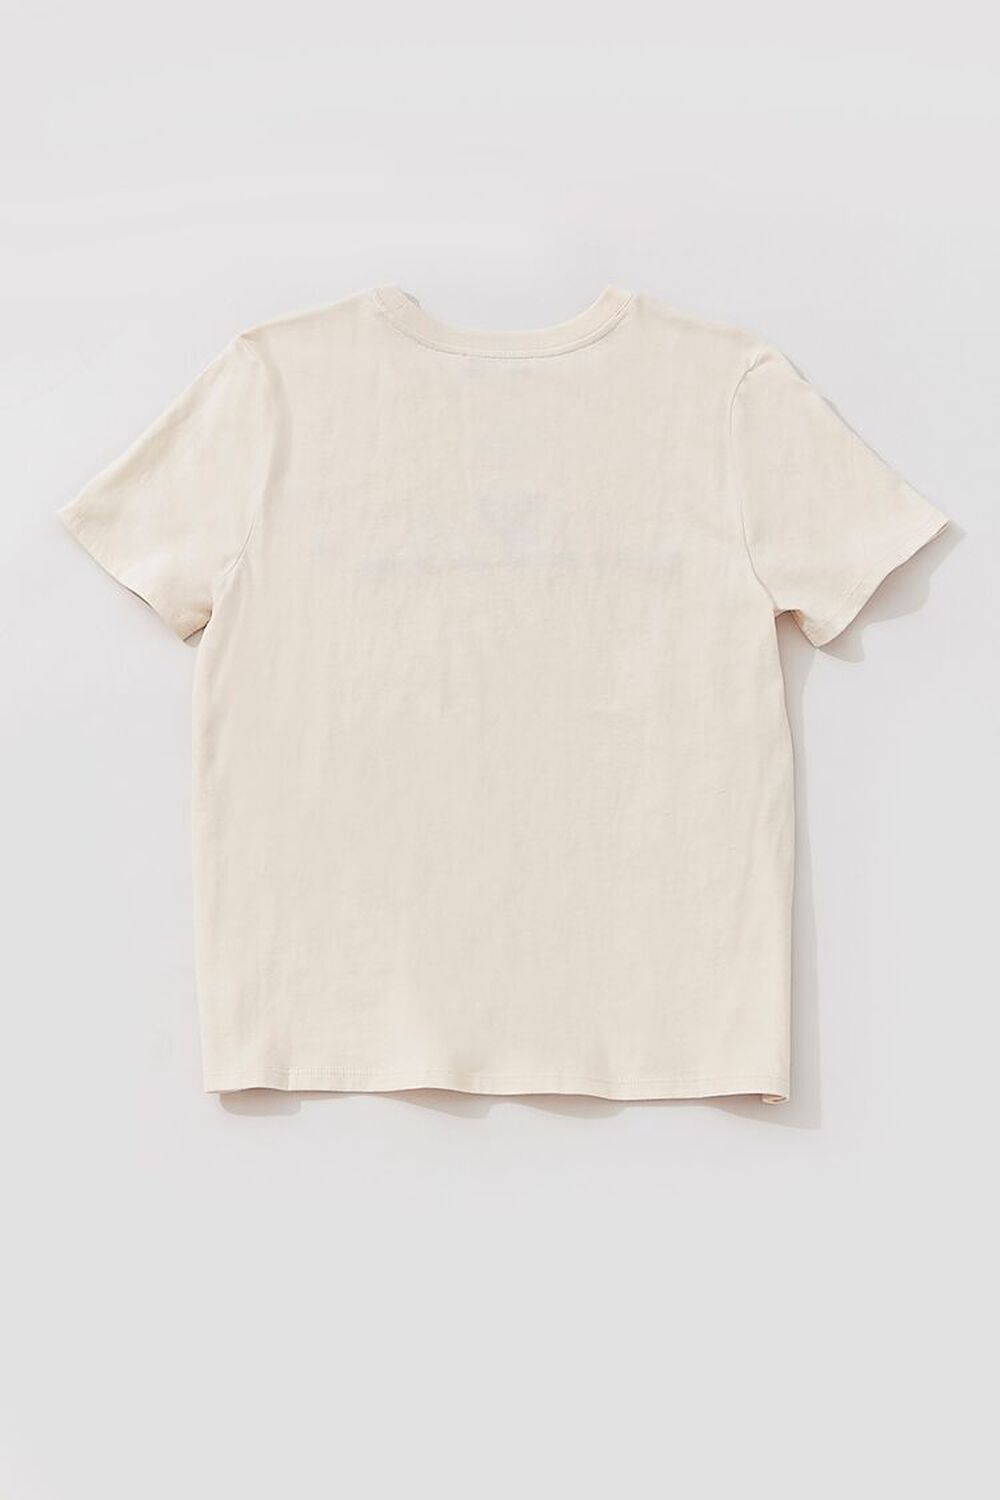 TAUPE/MULTI Organically Grown Cotton Graphic Tee, image 2